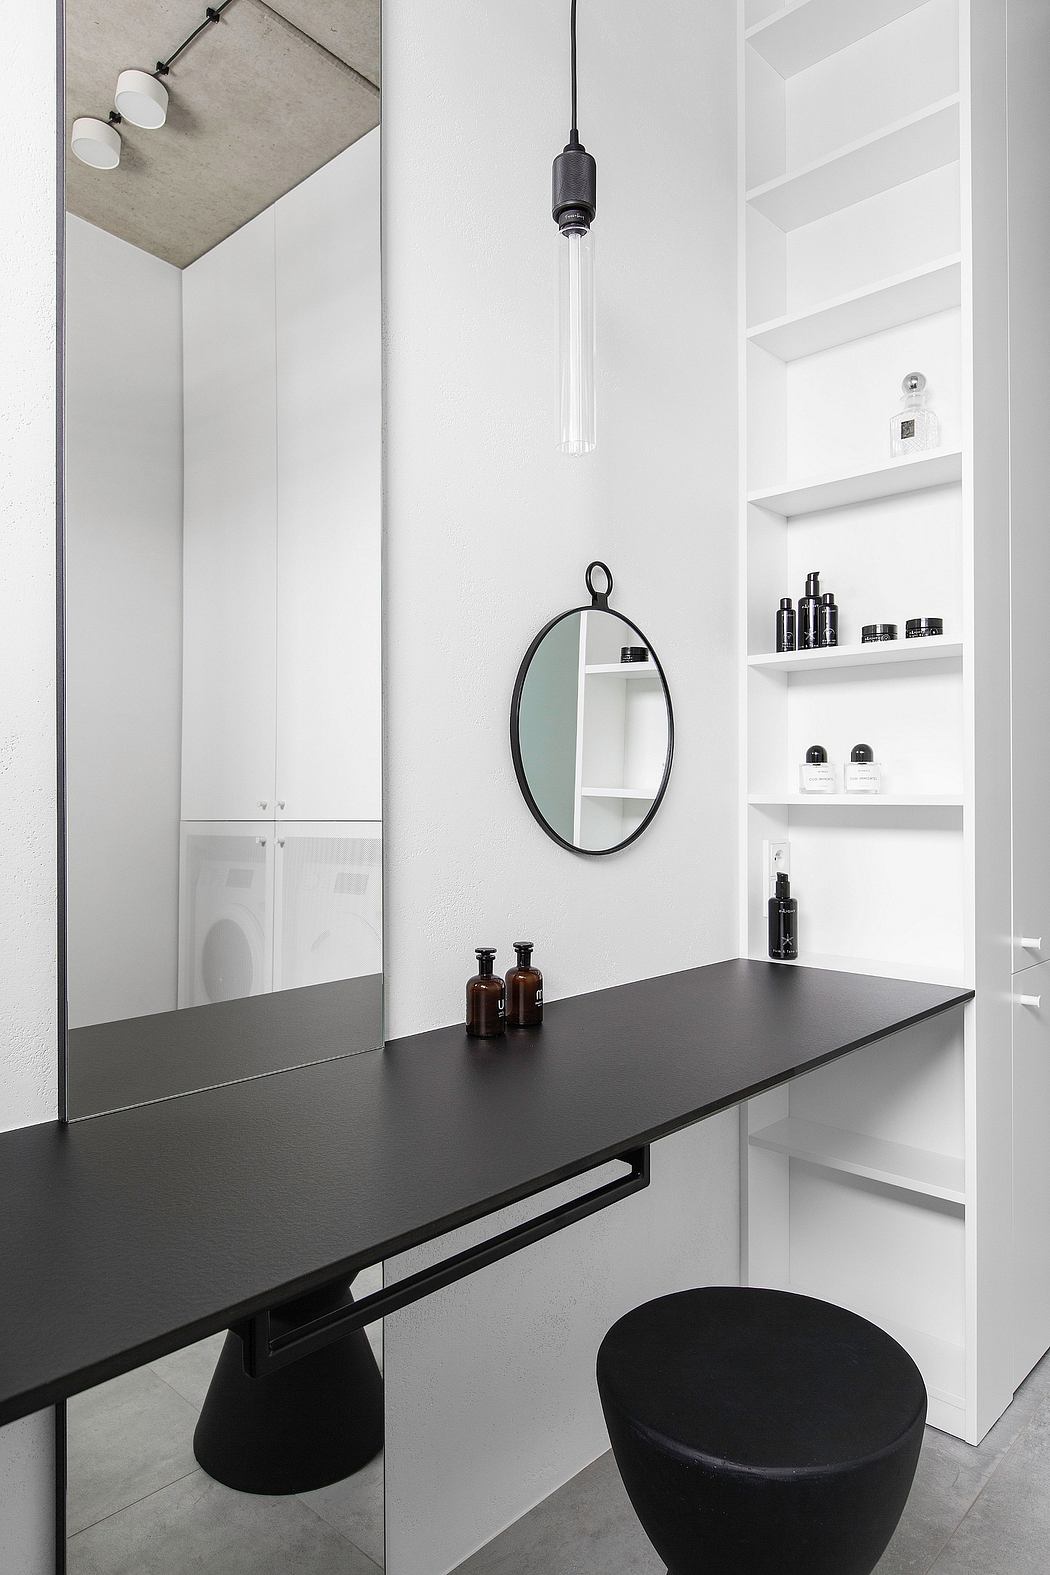 Minimalist bathroom design with black vanity, oval mirror, and shelving for toiletries.